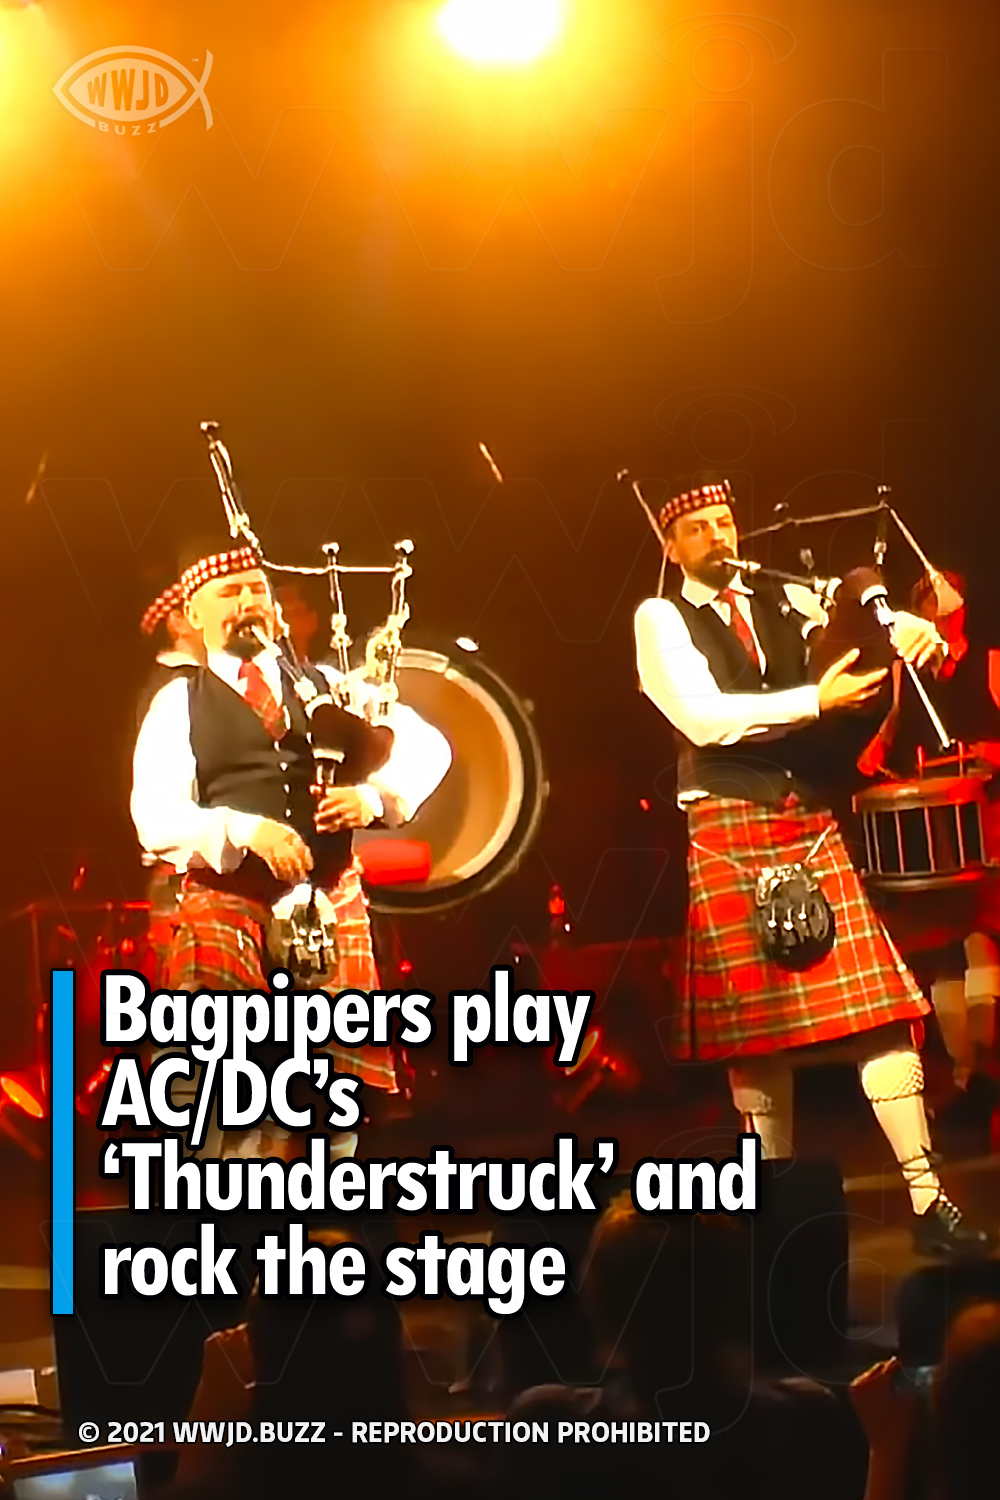 Bagpipers play AC/DC’s ‘Thunderstruck’ and rock the stage